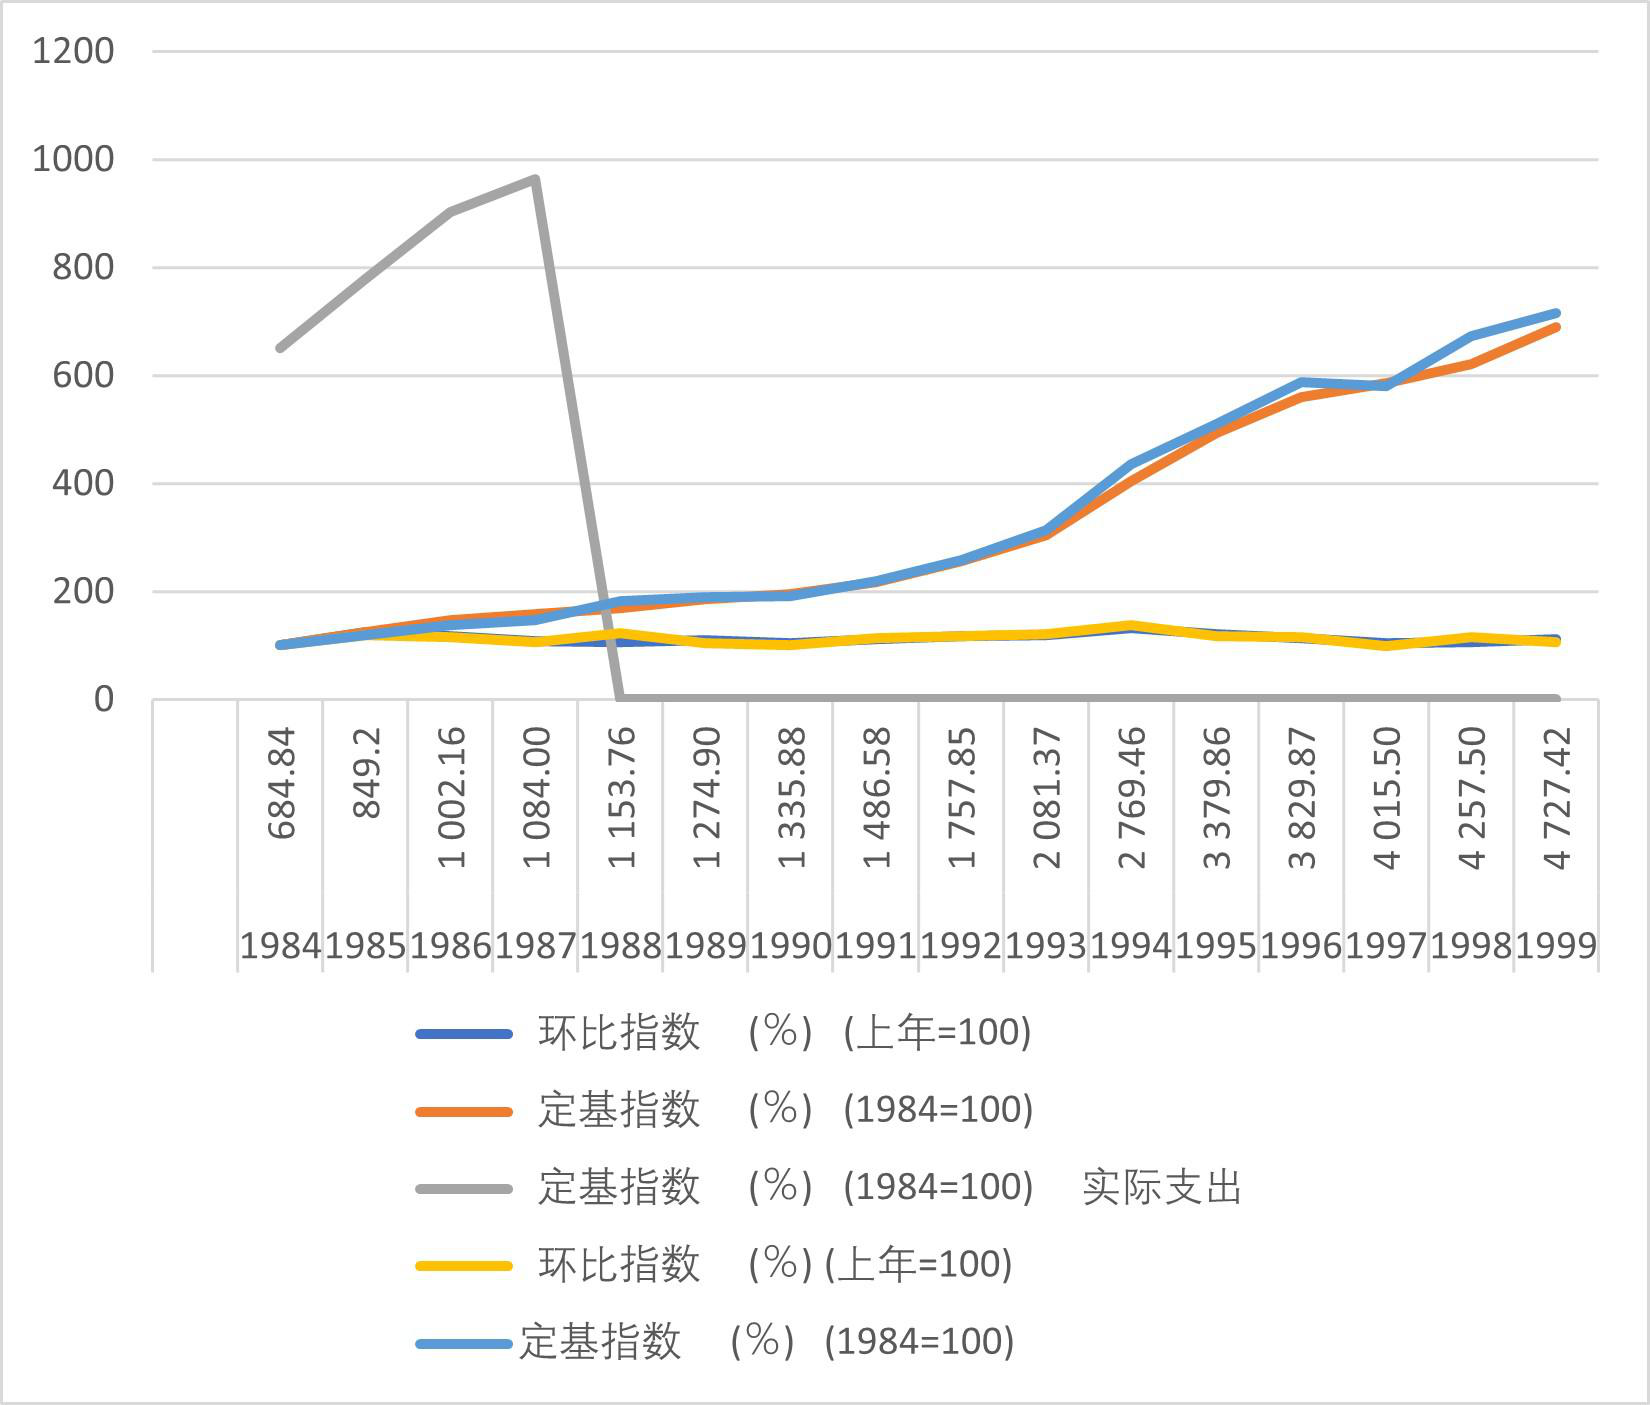 Per capita annual real income and expenditure index of urban households in Qinghai Province (1984-2000)